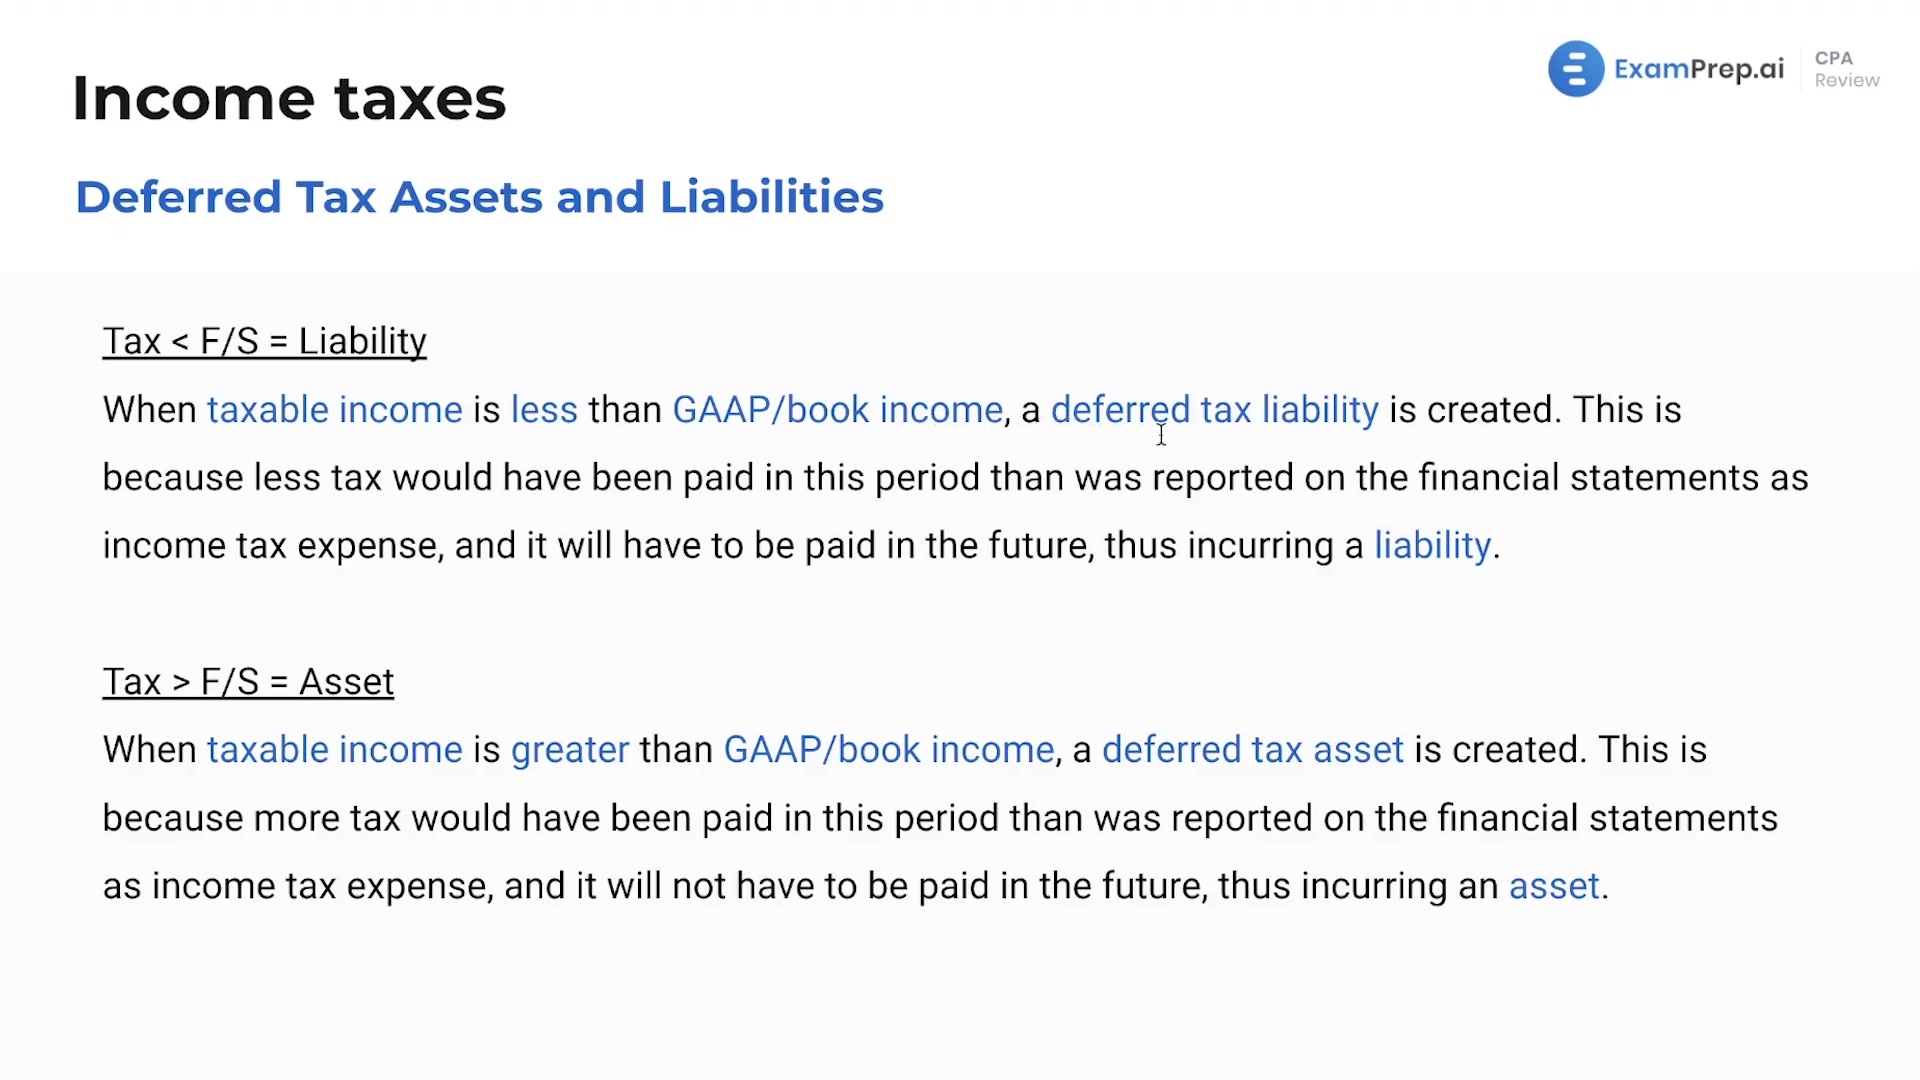 Deferred Tax Assets and Liabilities lesson thumbnail